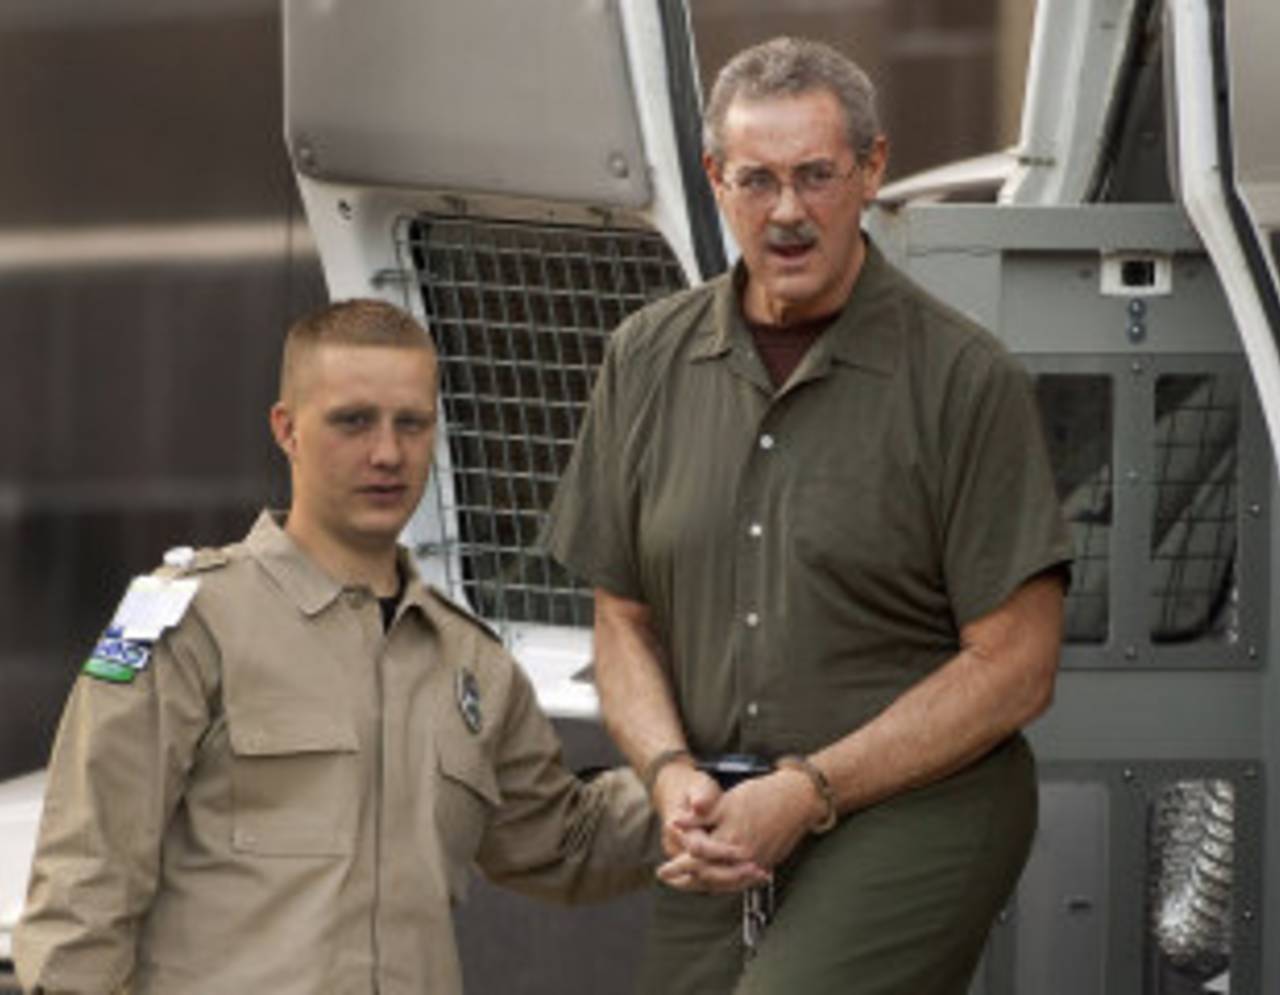 Allen Stanford arrives at the Bob Casey Federal Courthouse in Houston, where he will be tried for fraud, Houston, Texas, March 5, 2012